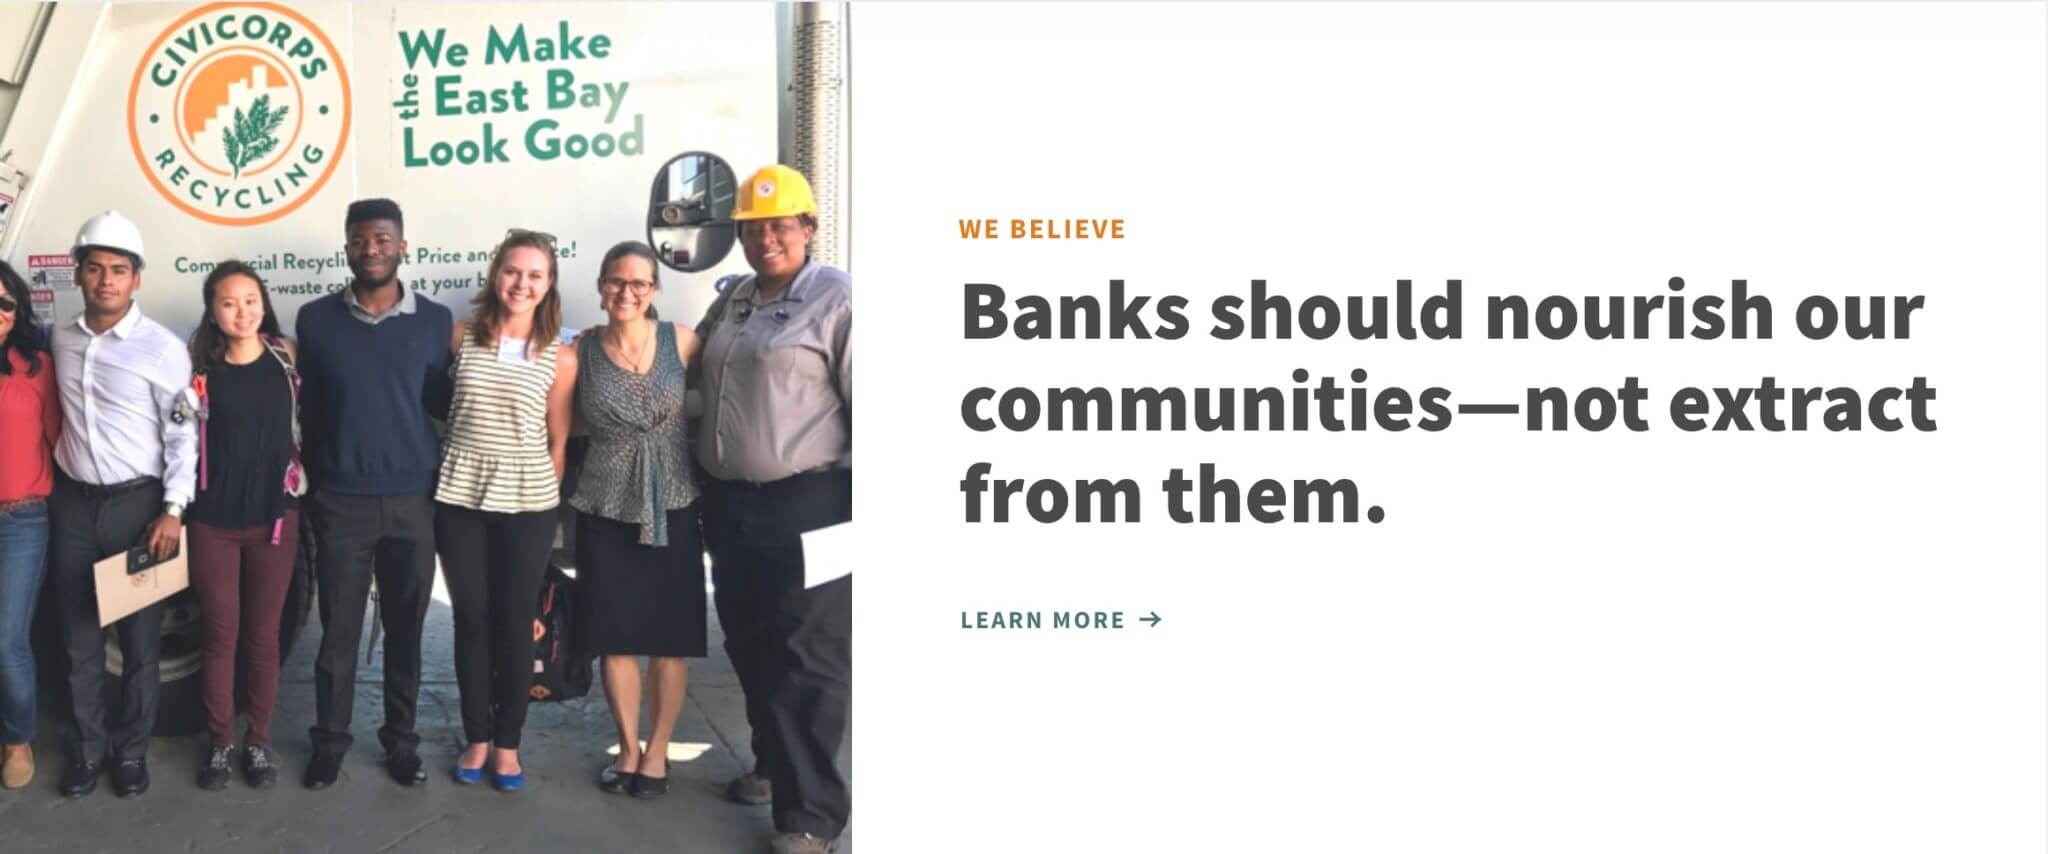 Bank should nourish our communities - not extract from them